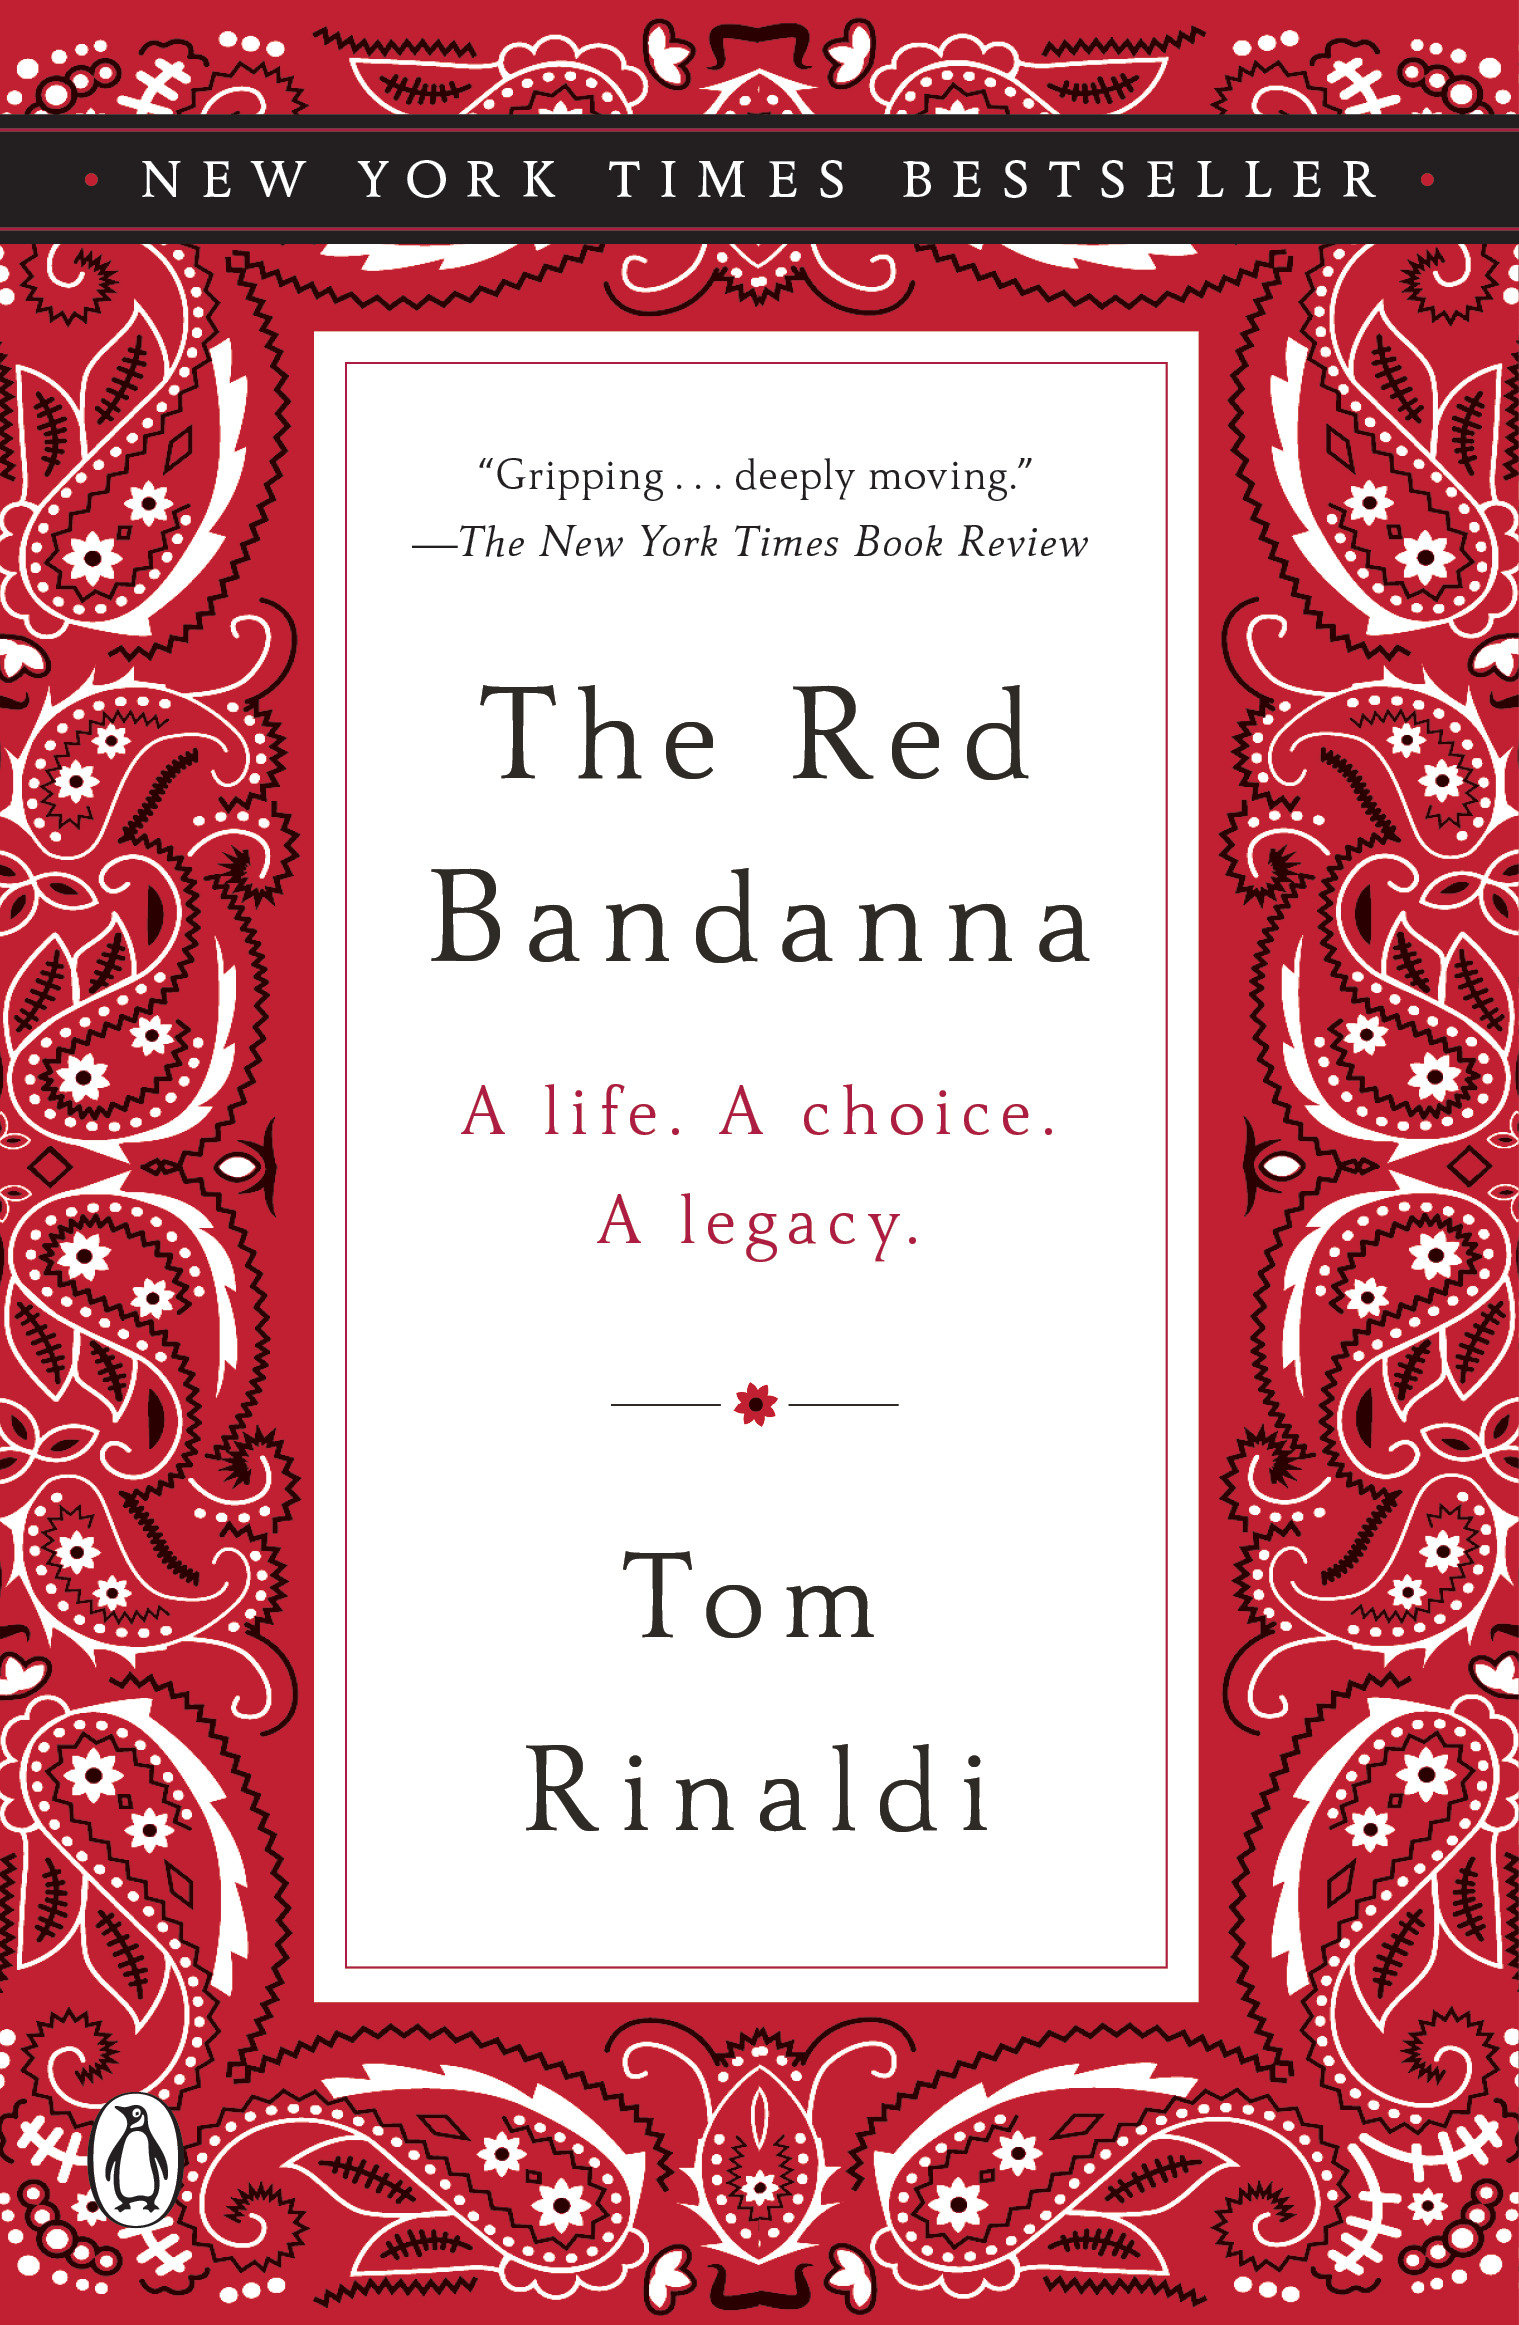 The red bandanna cover image